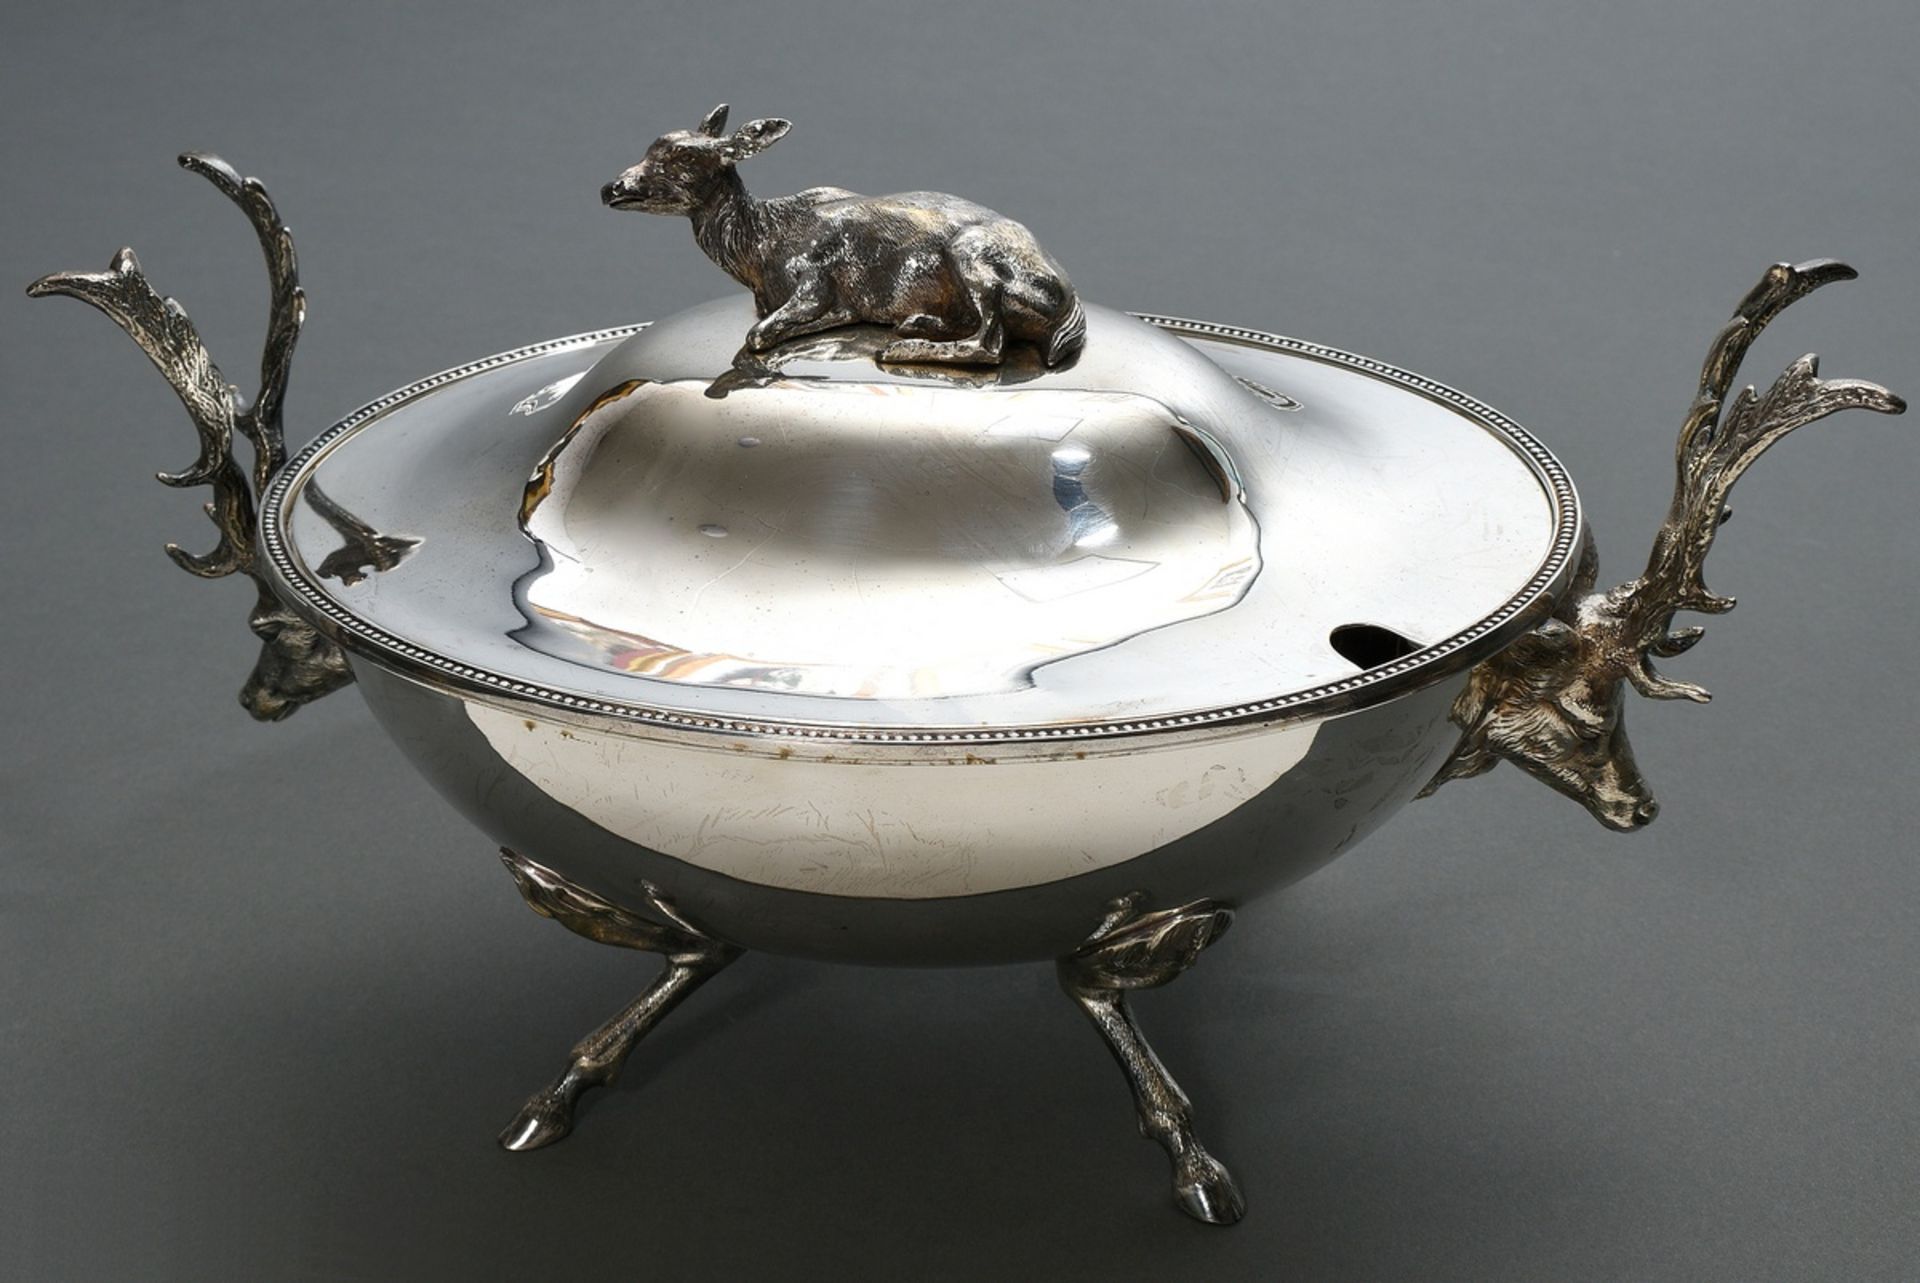 Decorative hunting lidded tureen with ovoid body on naturalistic cloven-hoofed feet and stag head h - Image 8 of 10